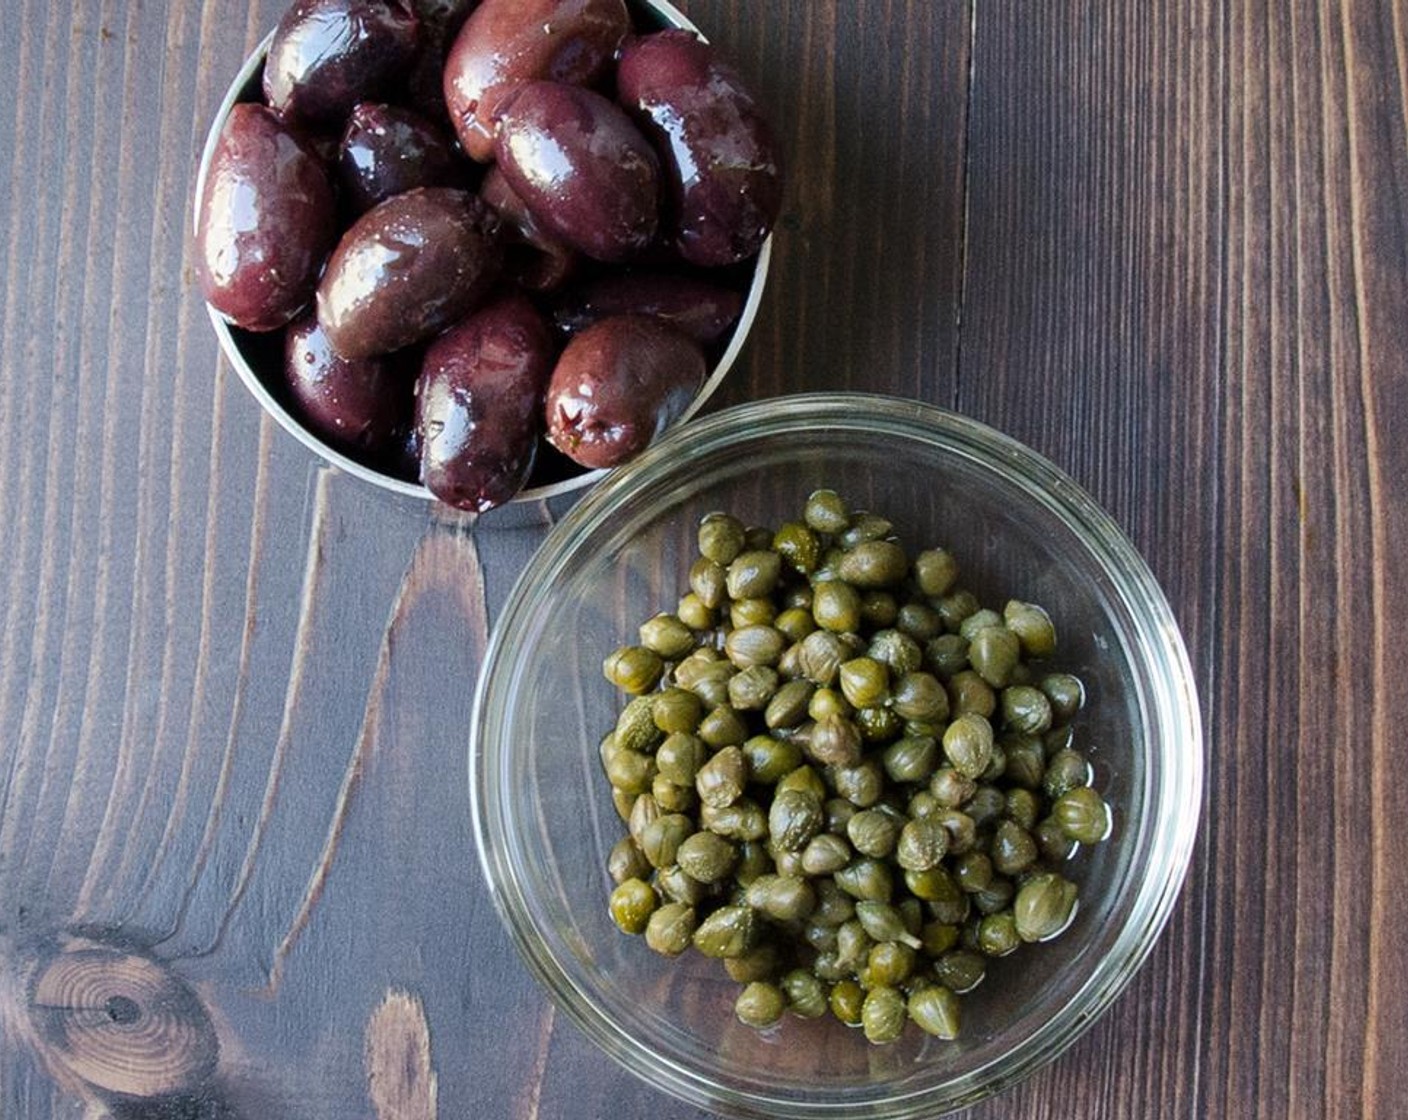 step 9 Add the Kalamata Olives (1/2 cup), Capers (2 Tbsp), and Red Wine Vinegar (1 Tbsp). Toss to combine.